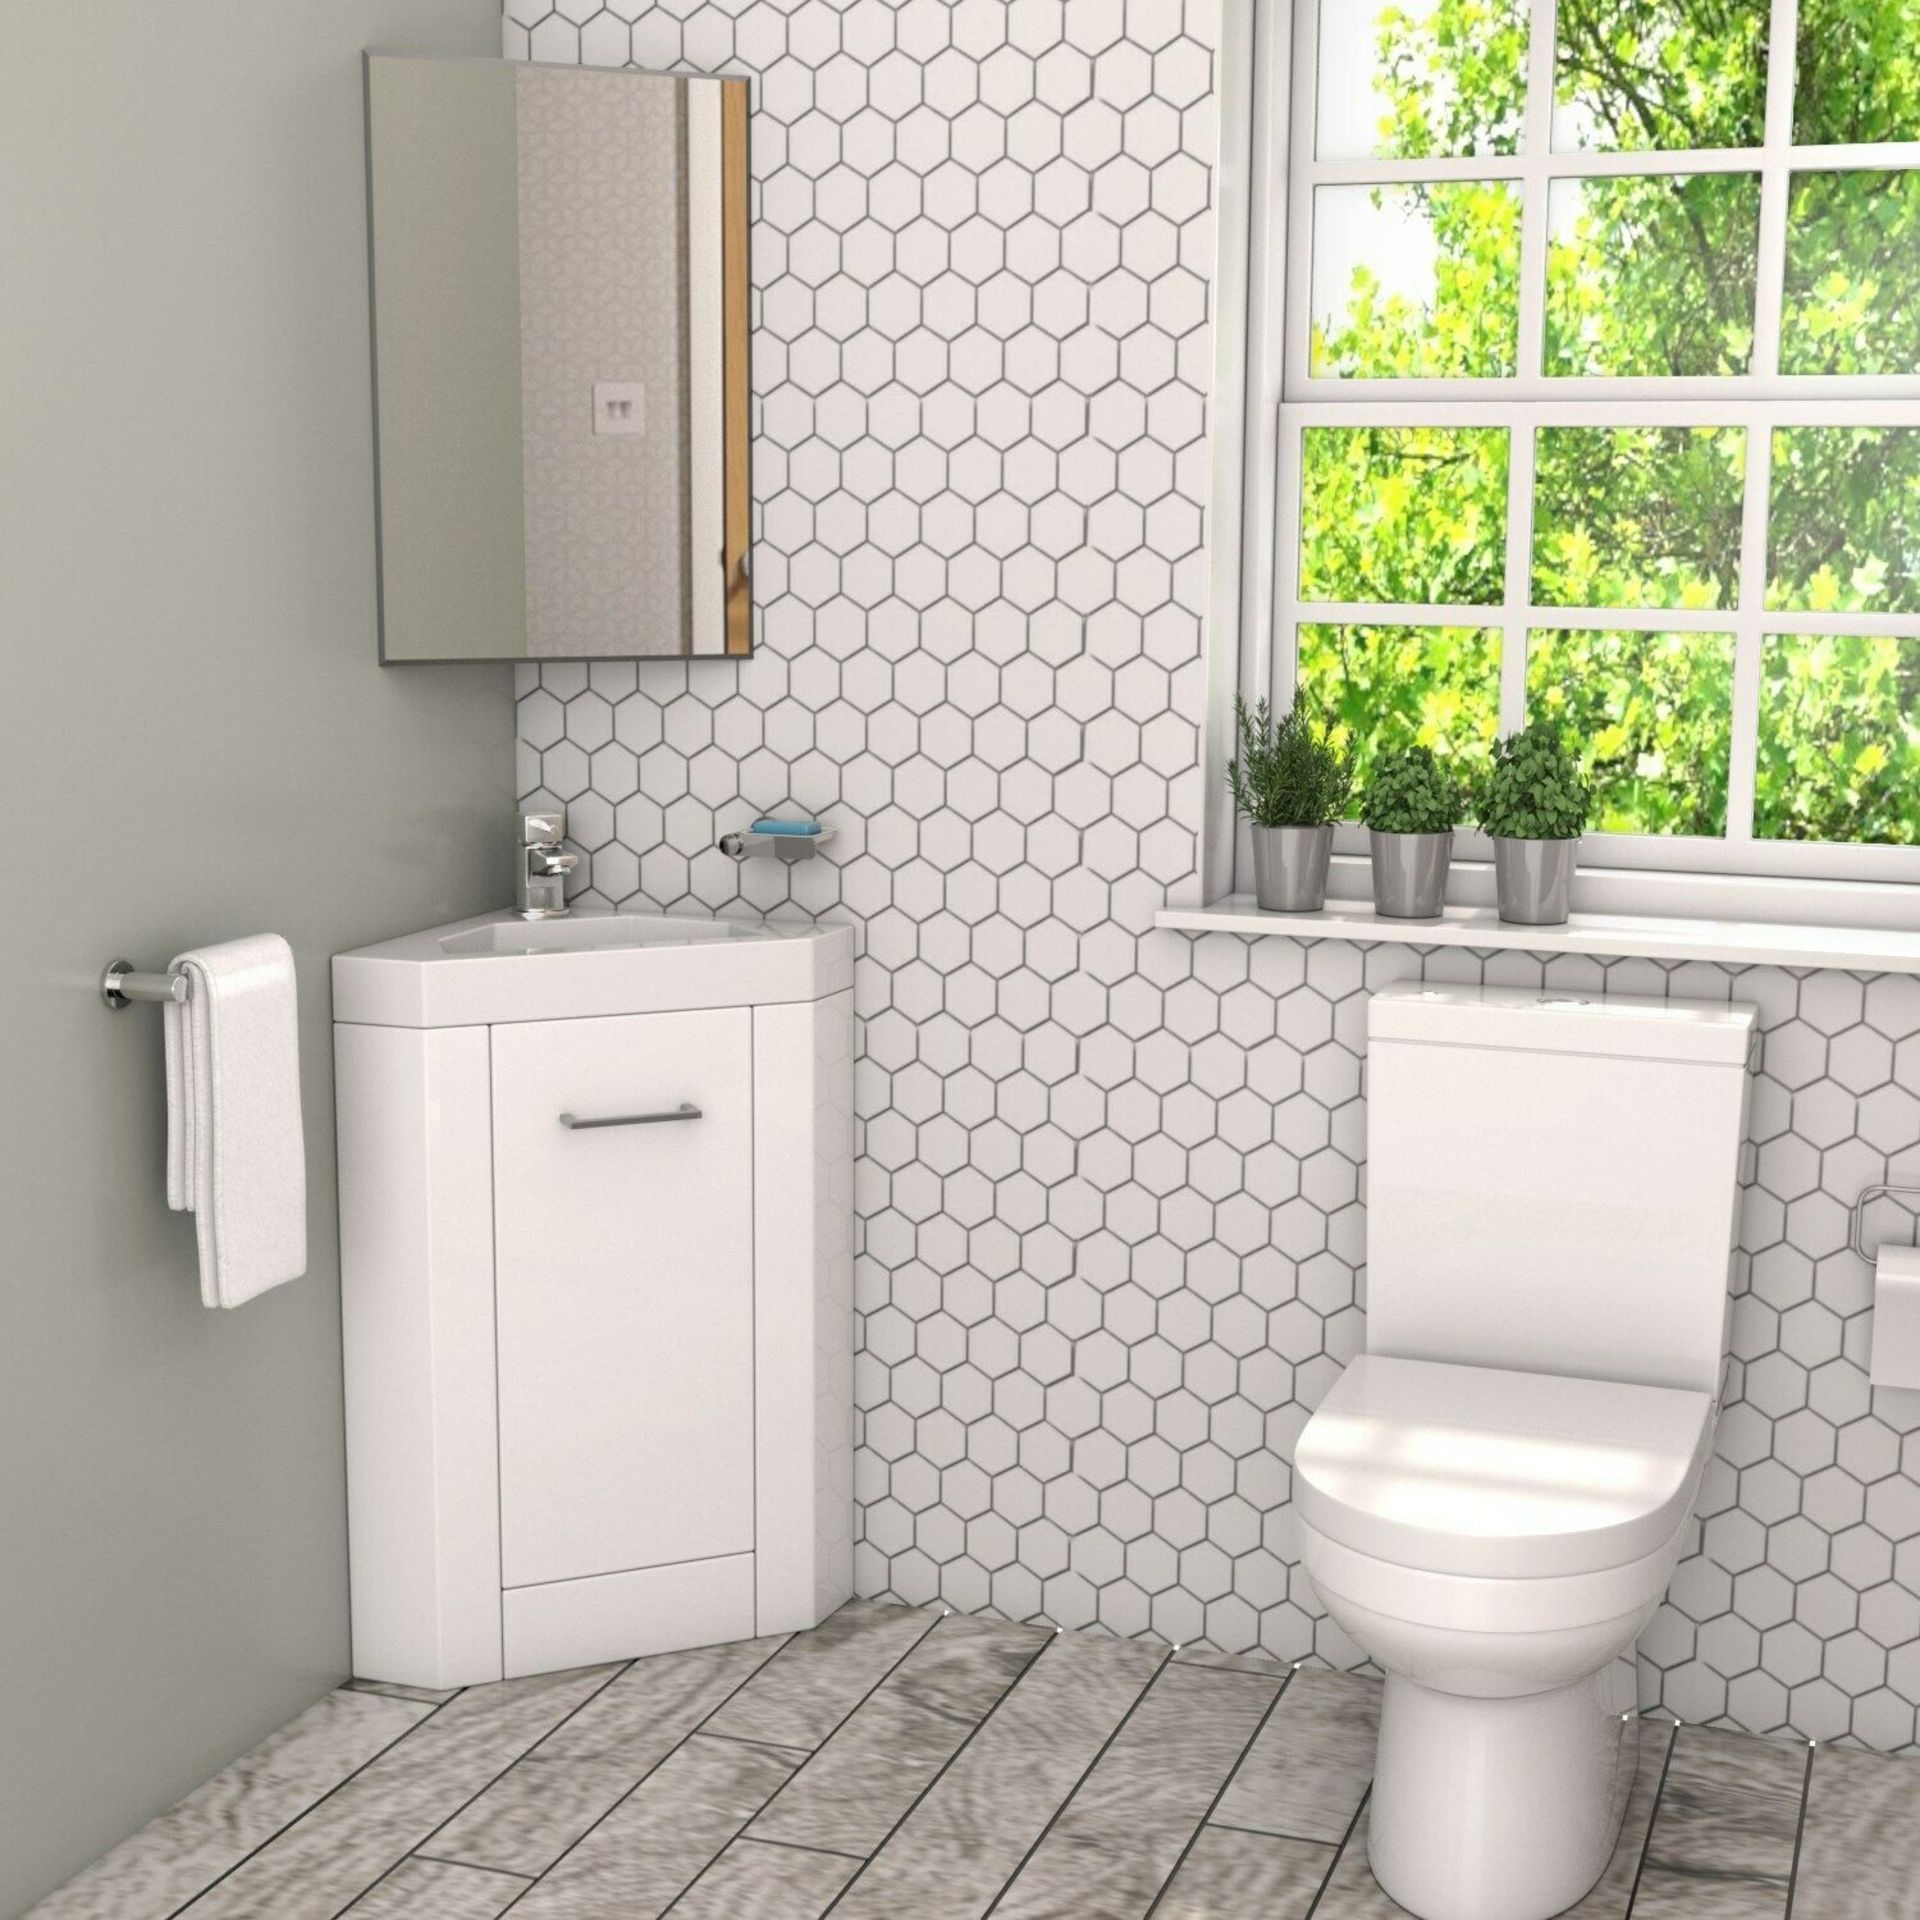 New & Boxed 400mm White Freestanding Vanity Unit With Basin - Apollo. RRP £394.99.Mv836V2.Cle... - Image 2 of 3